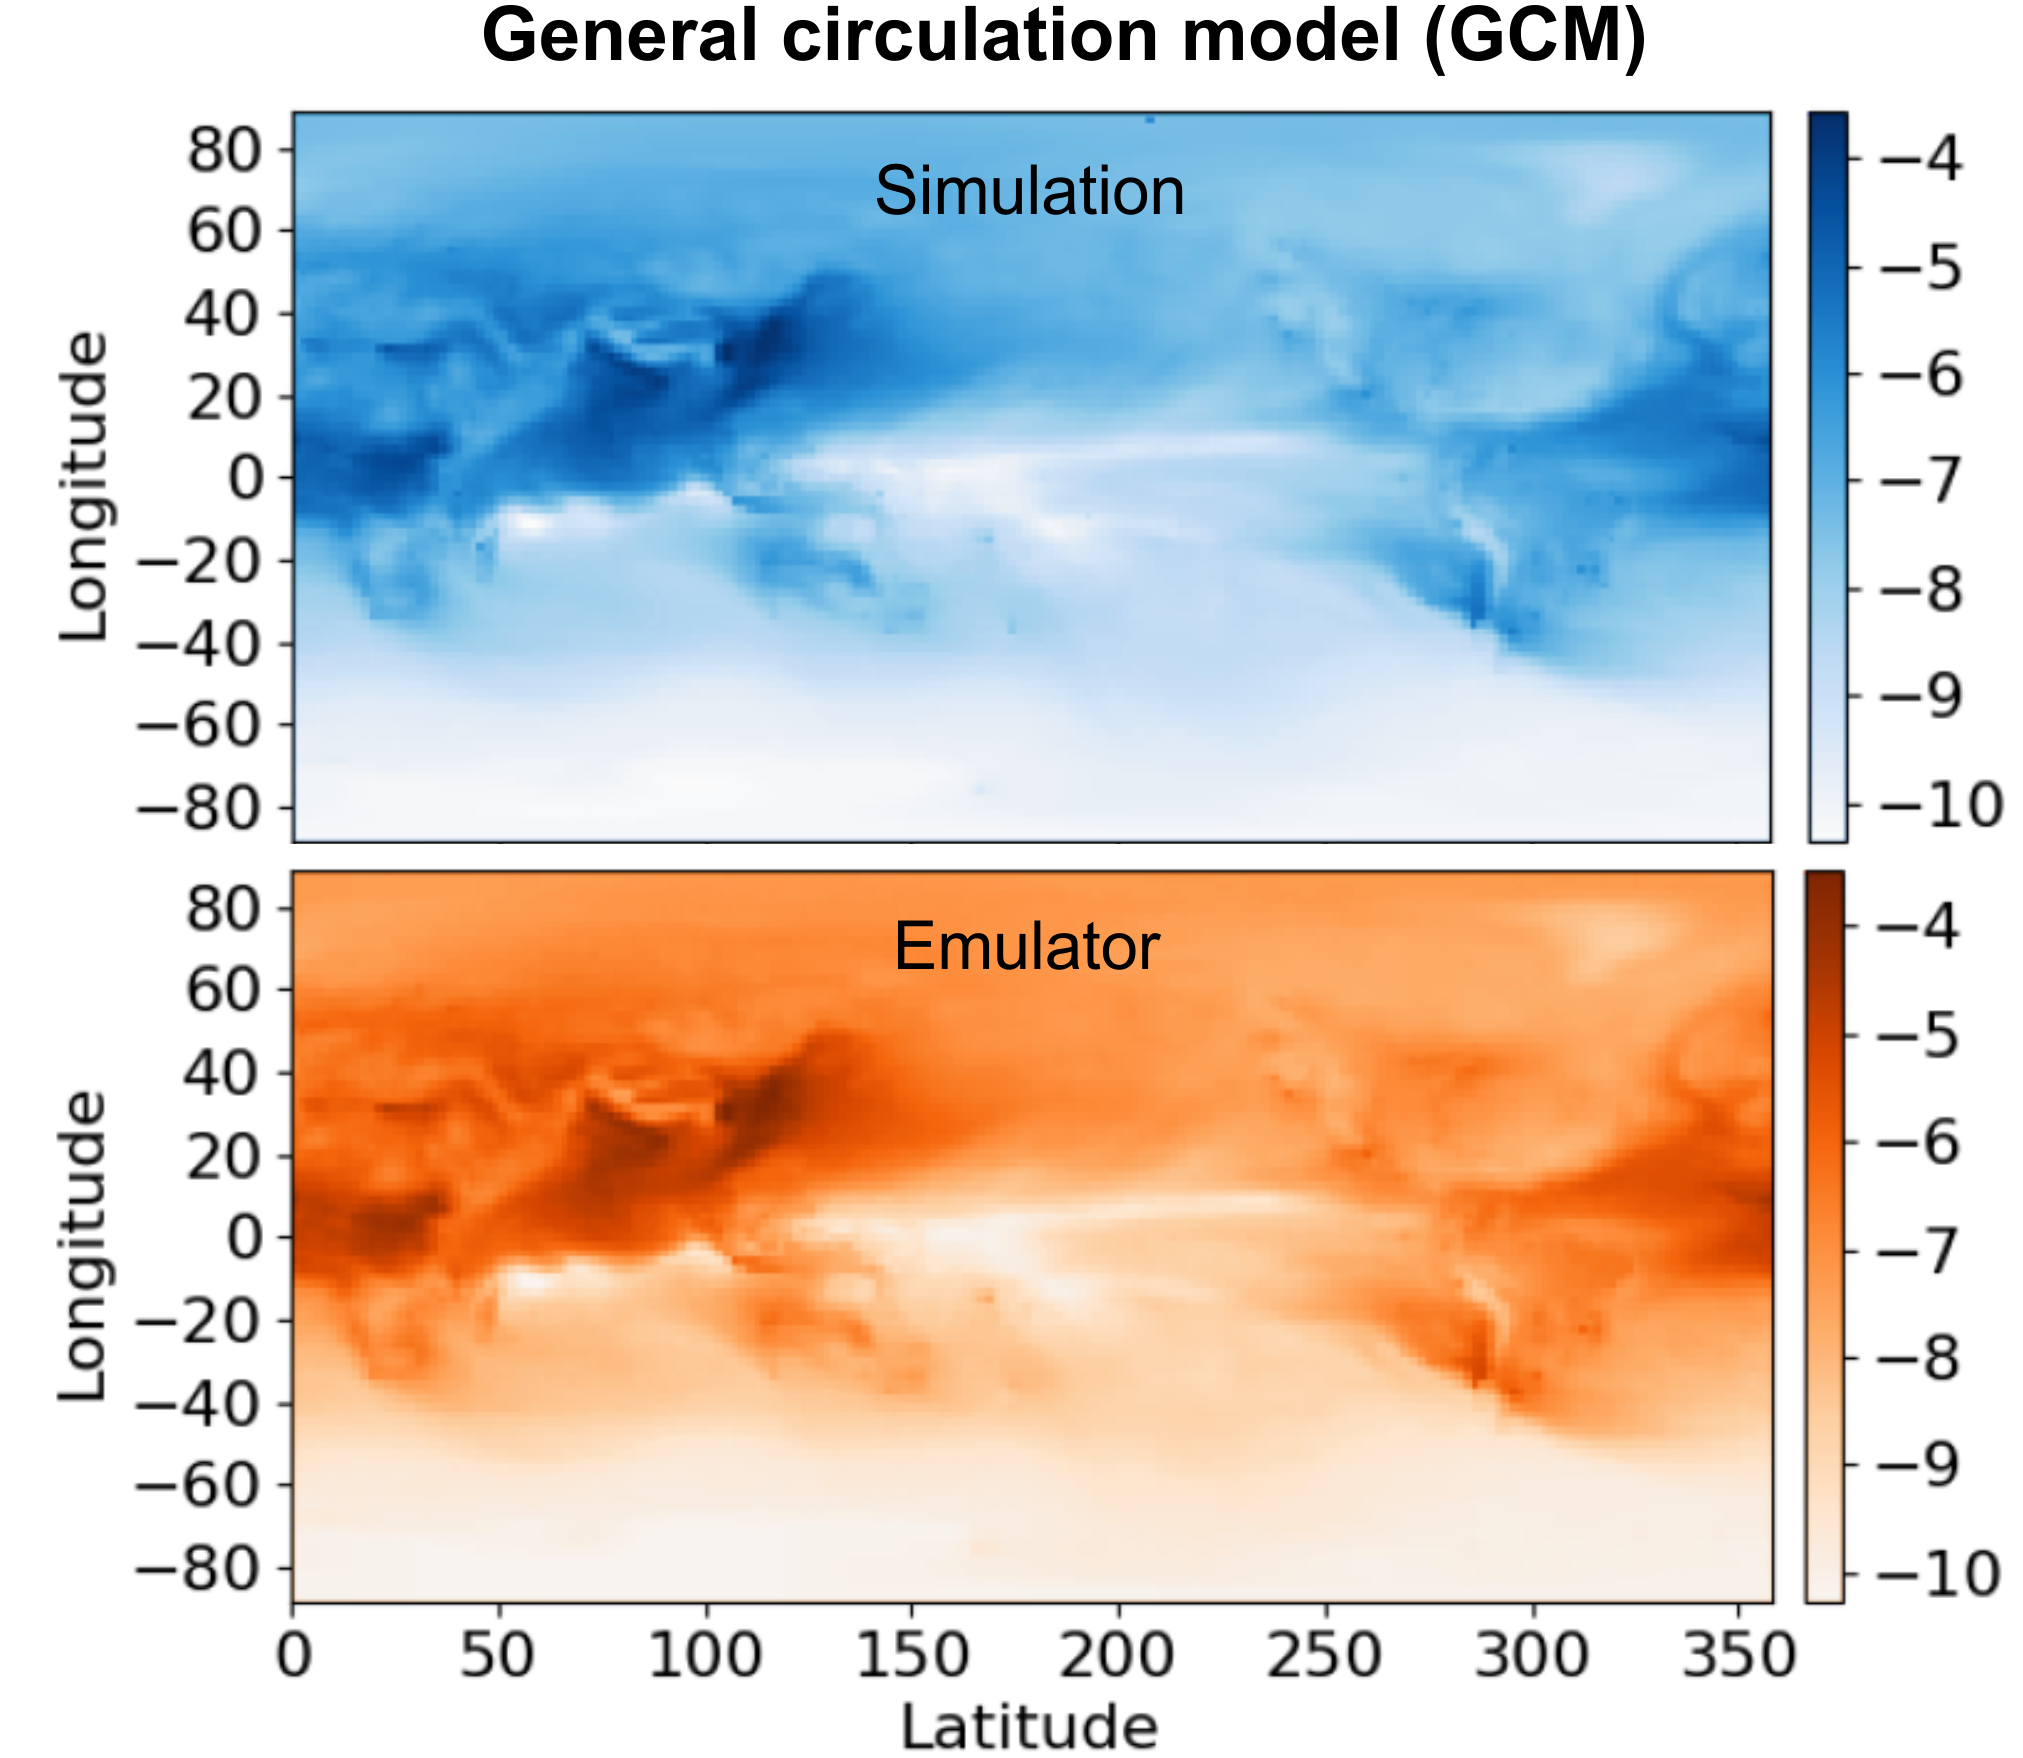 Predictions of the General Circulation Model compared with those of its emulator.